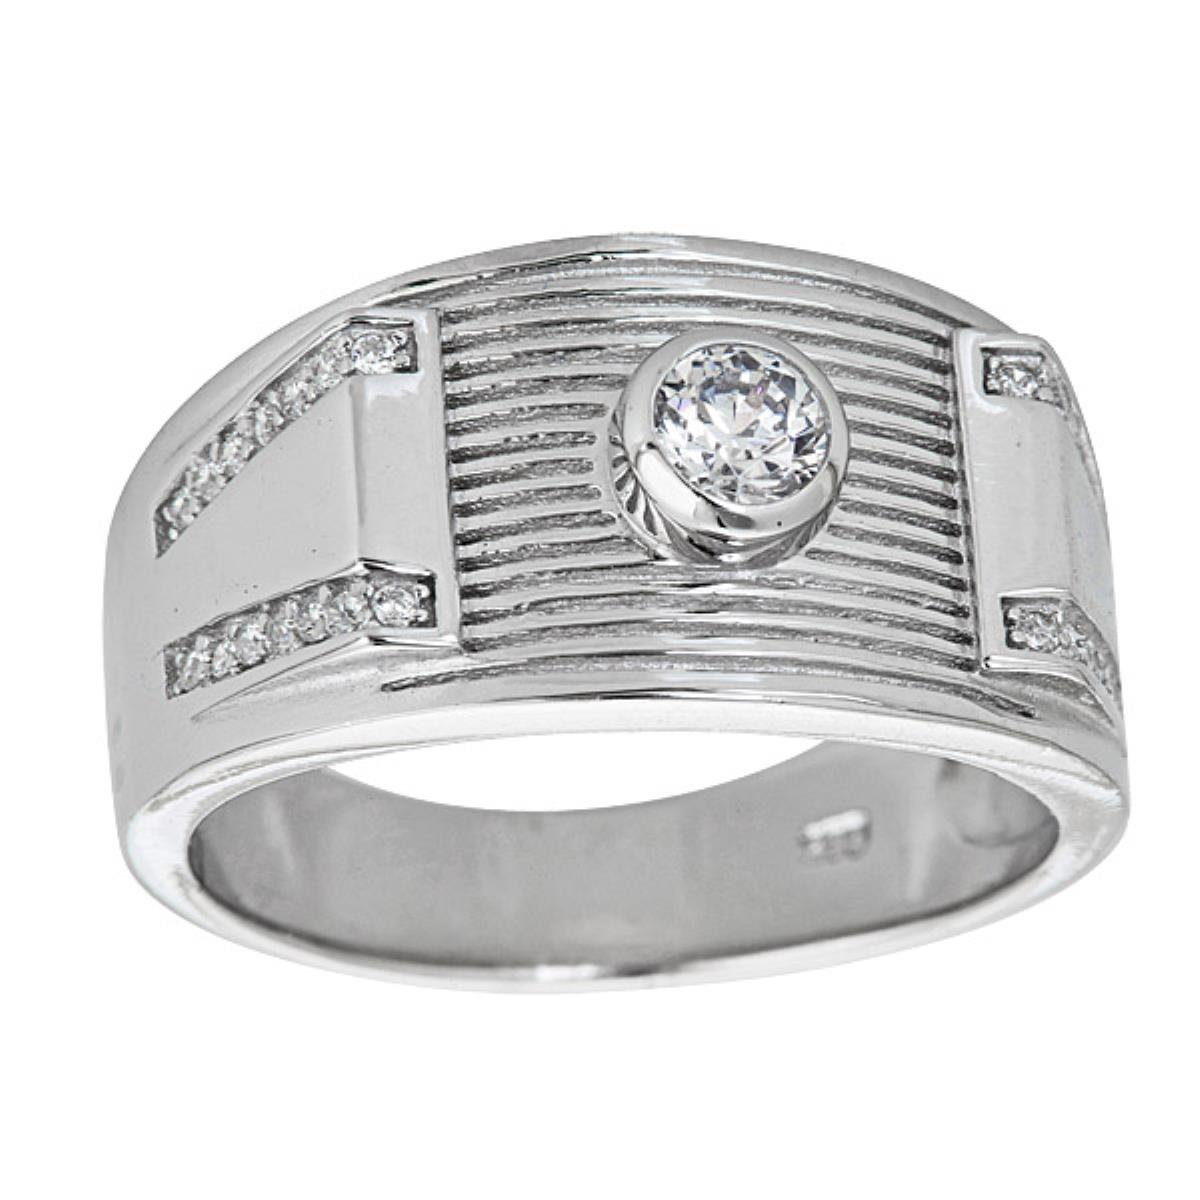 Sterling Silver Rhodium Men's Solitaire & Pave Symmetrical Ring